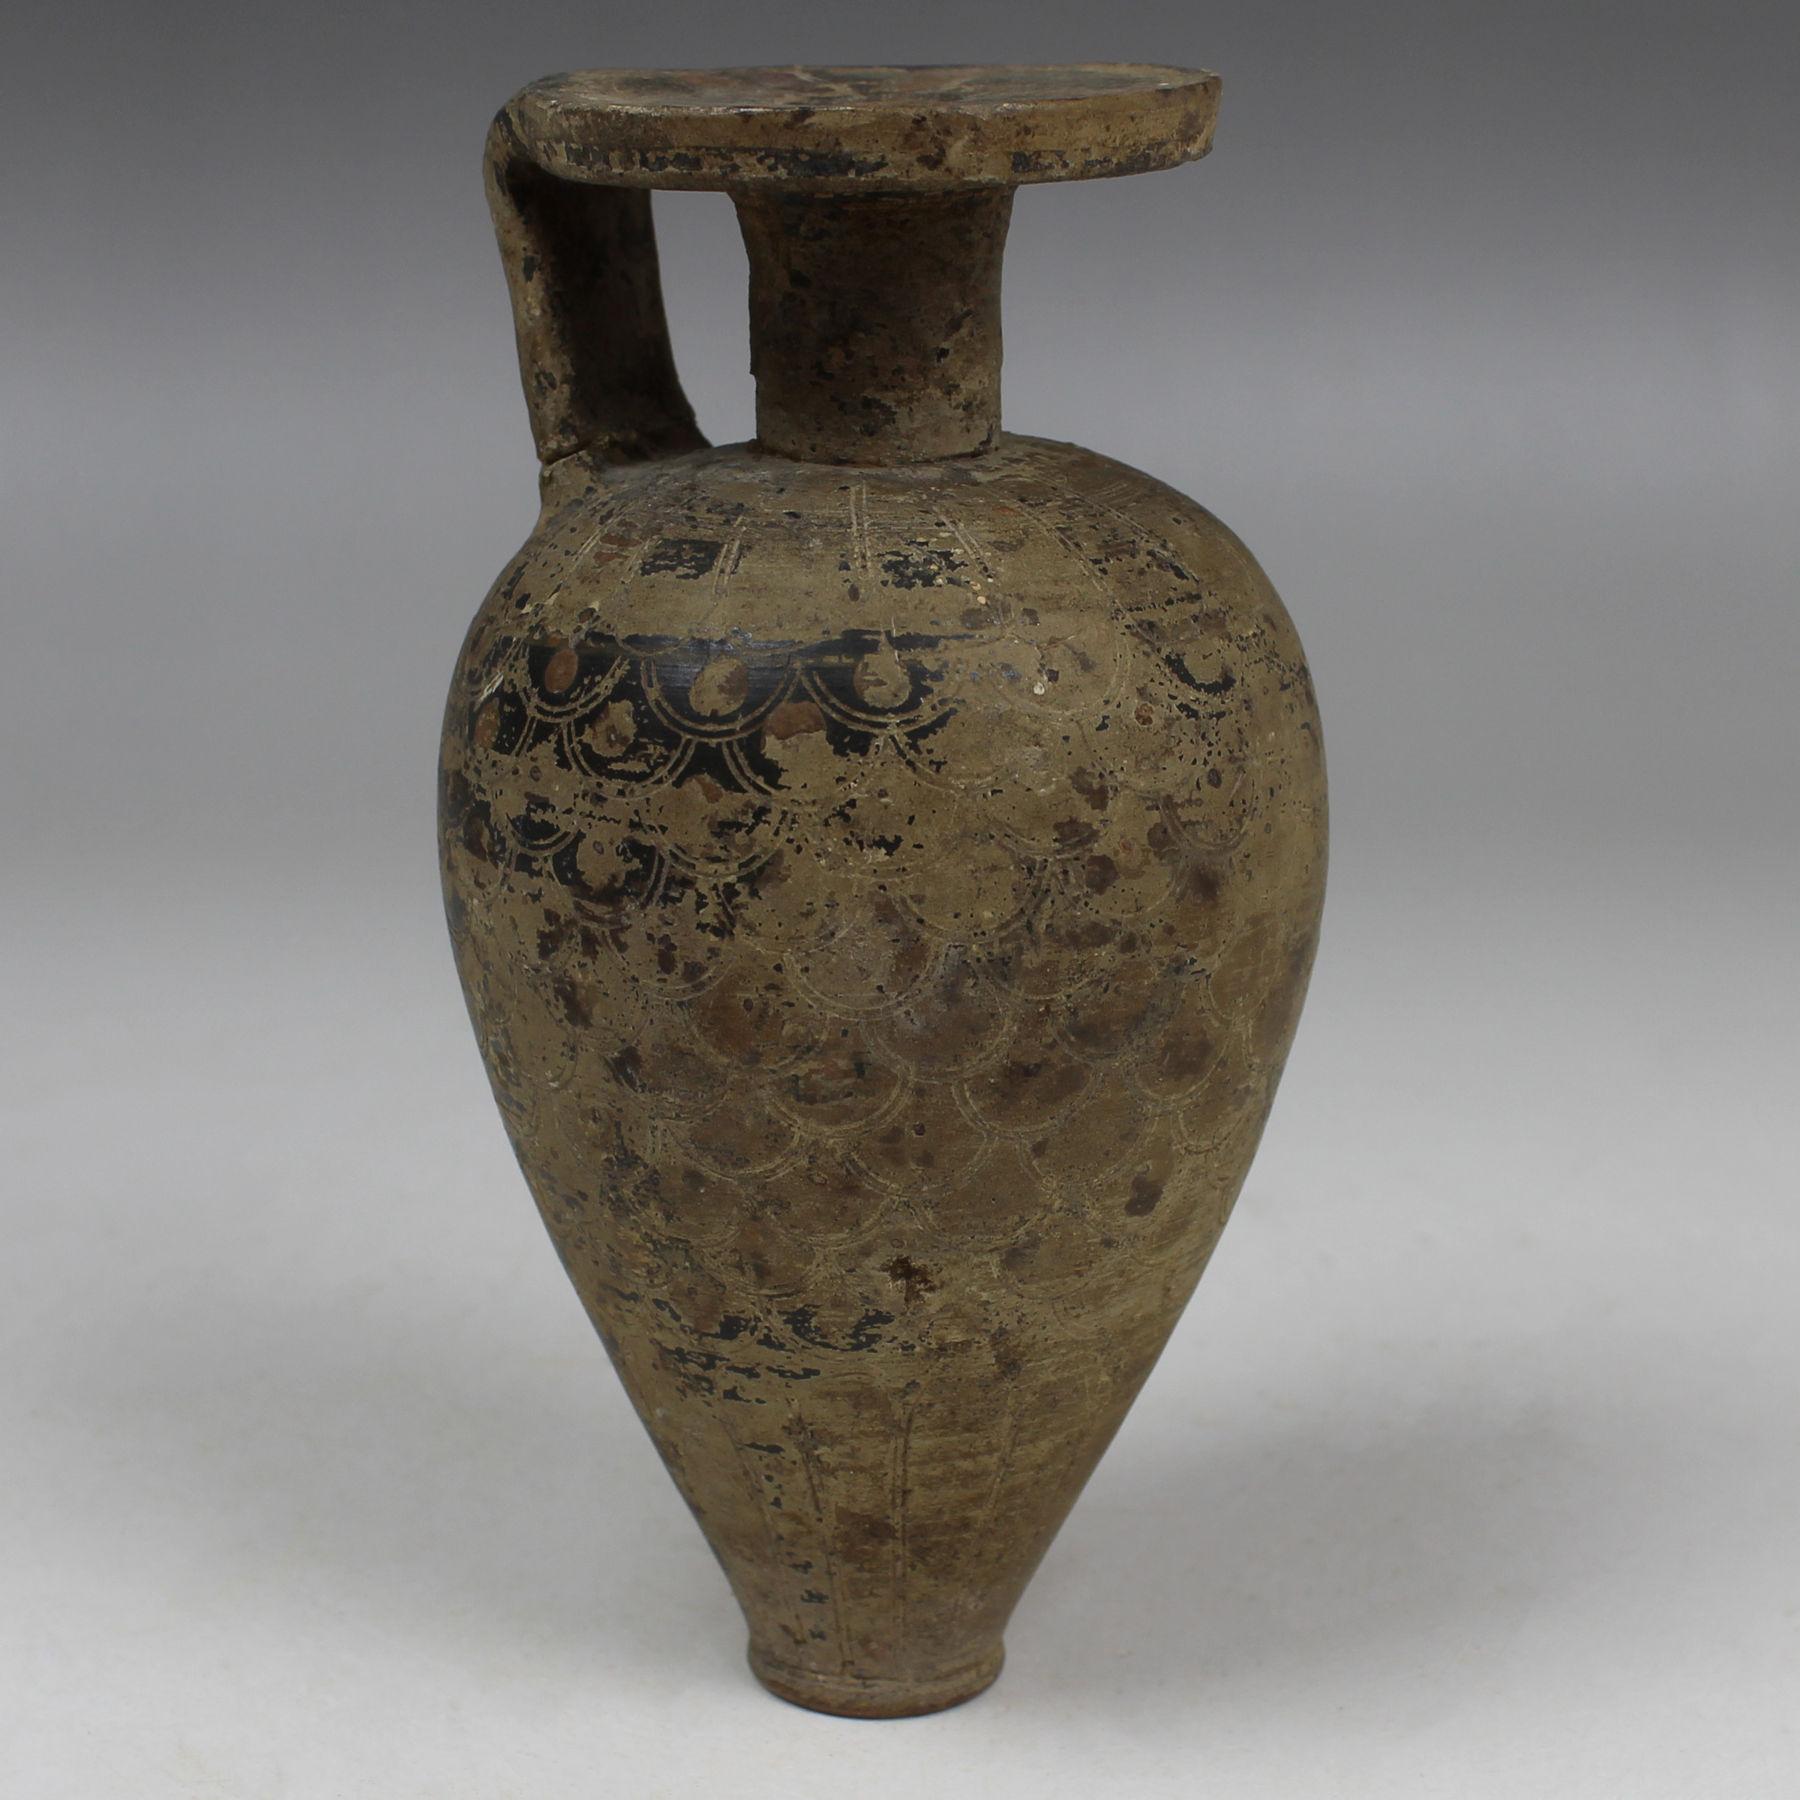 ITEM: Piriform aryballos with scale pattern
MATERIAL: Pottery
CULTURE: Greek, Corinthian
PERIOD: 7th Century B.C
DIMENSIONS: 116 mm x 57 mm
CONDITION: Good condition, handle repaired
PROVENANCE: Ex Swiss private collection, M. H. D., acquired